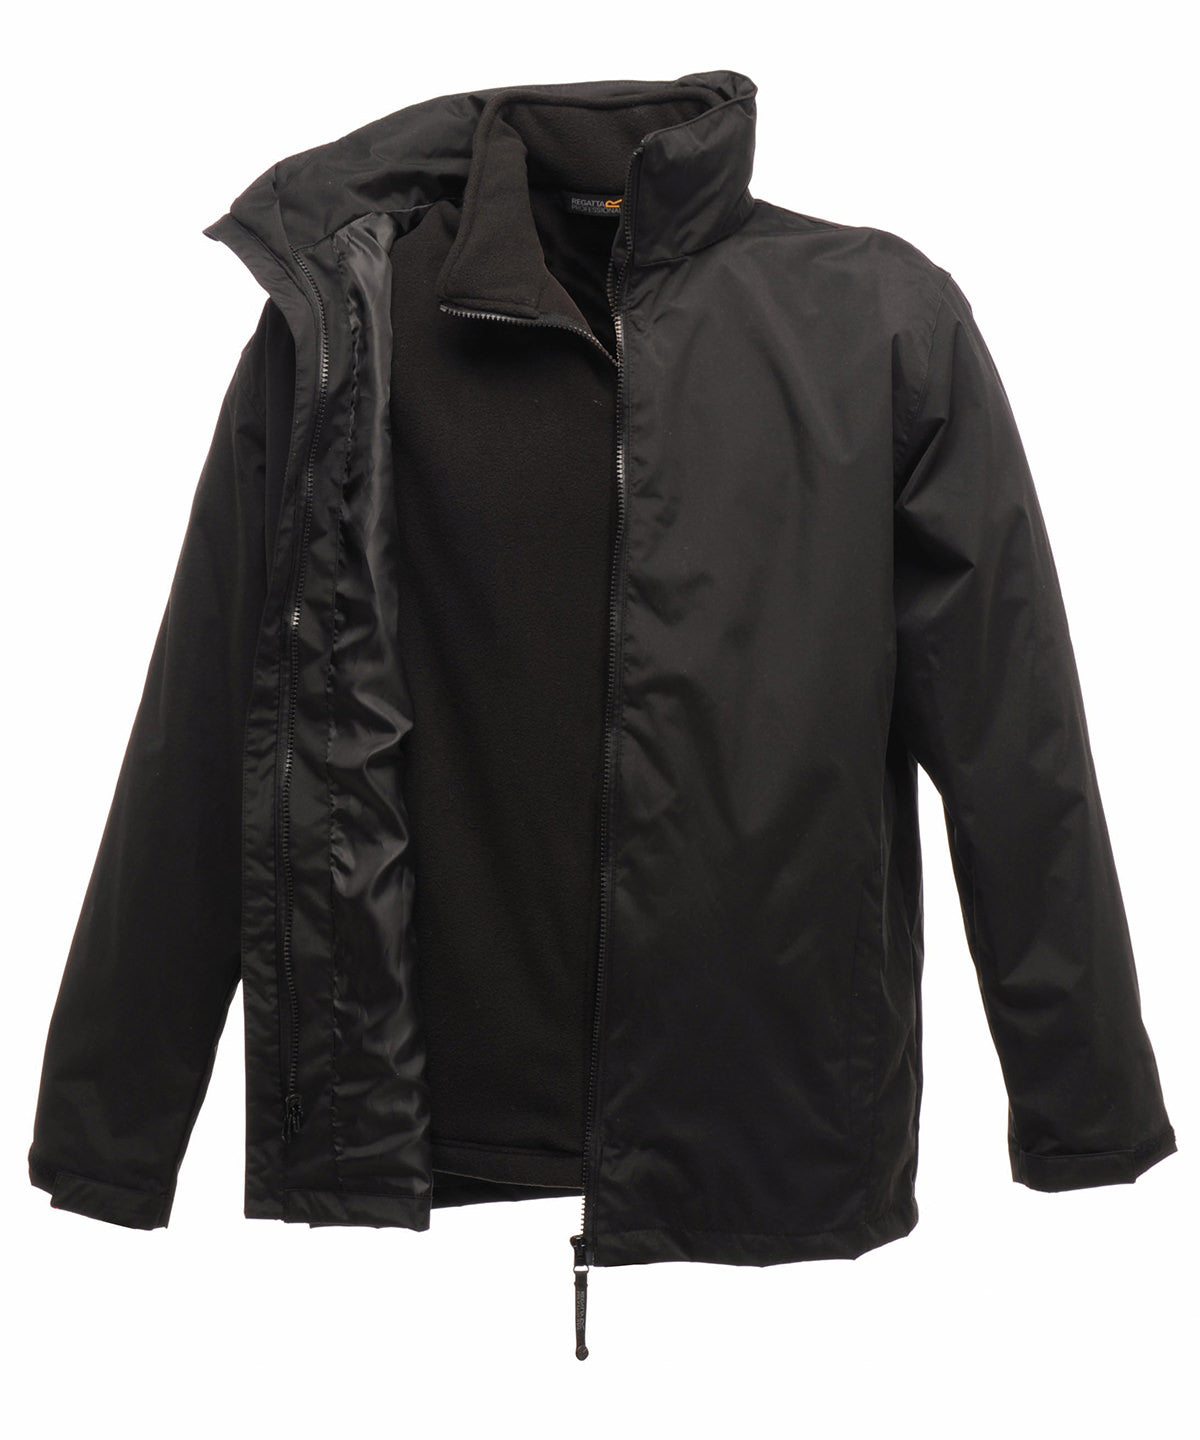 Classic 3-in-1 jacket